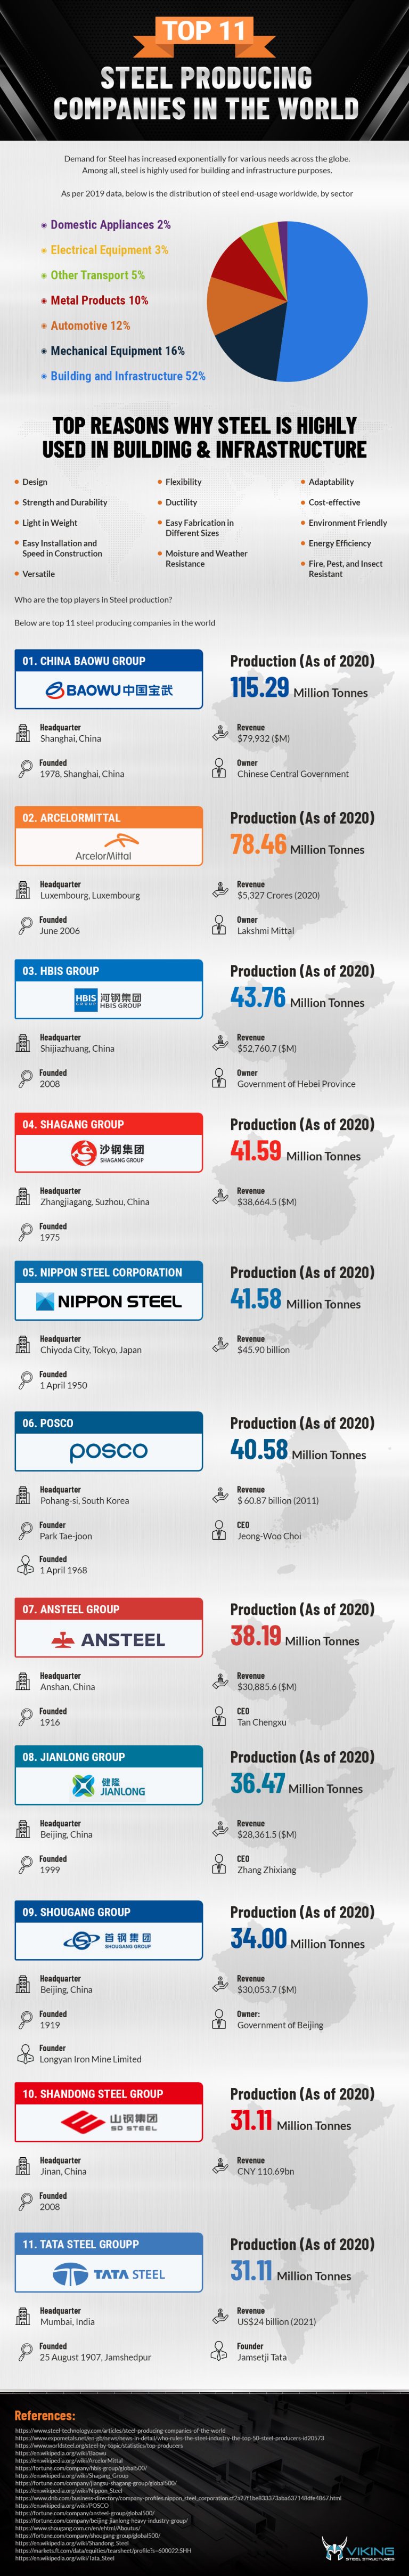 Top 11 Steel Producing Companies in the World